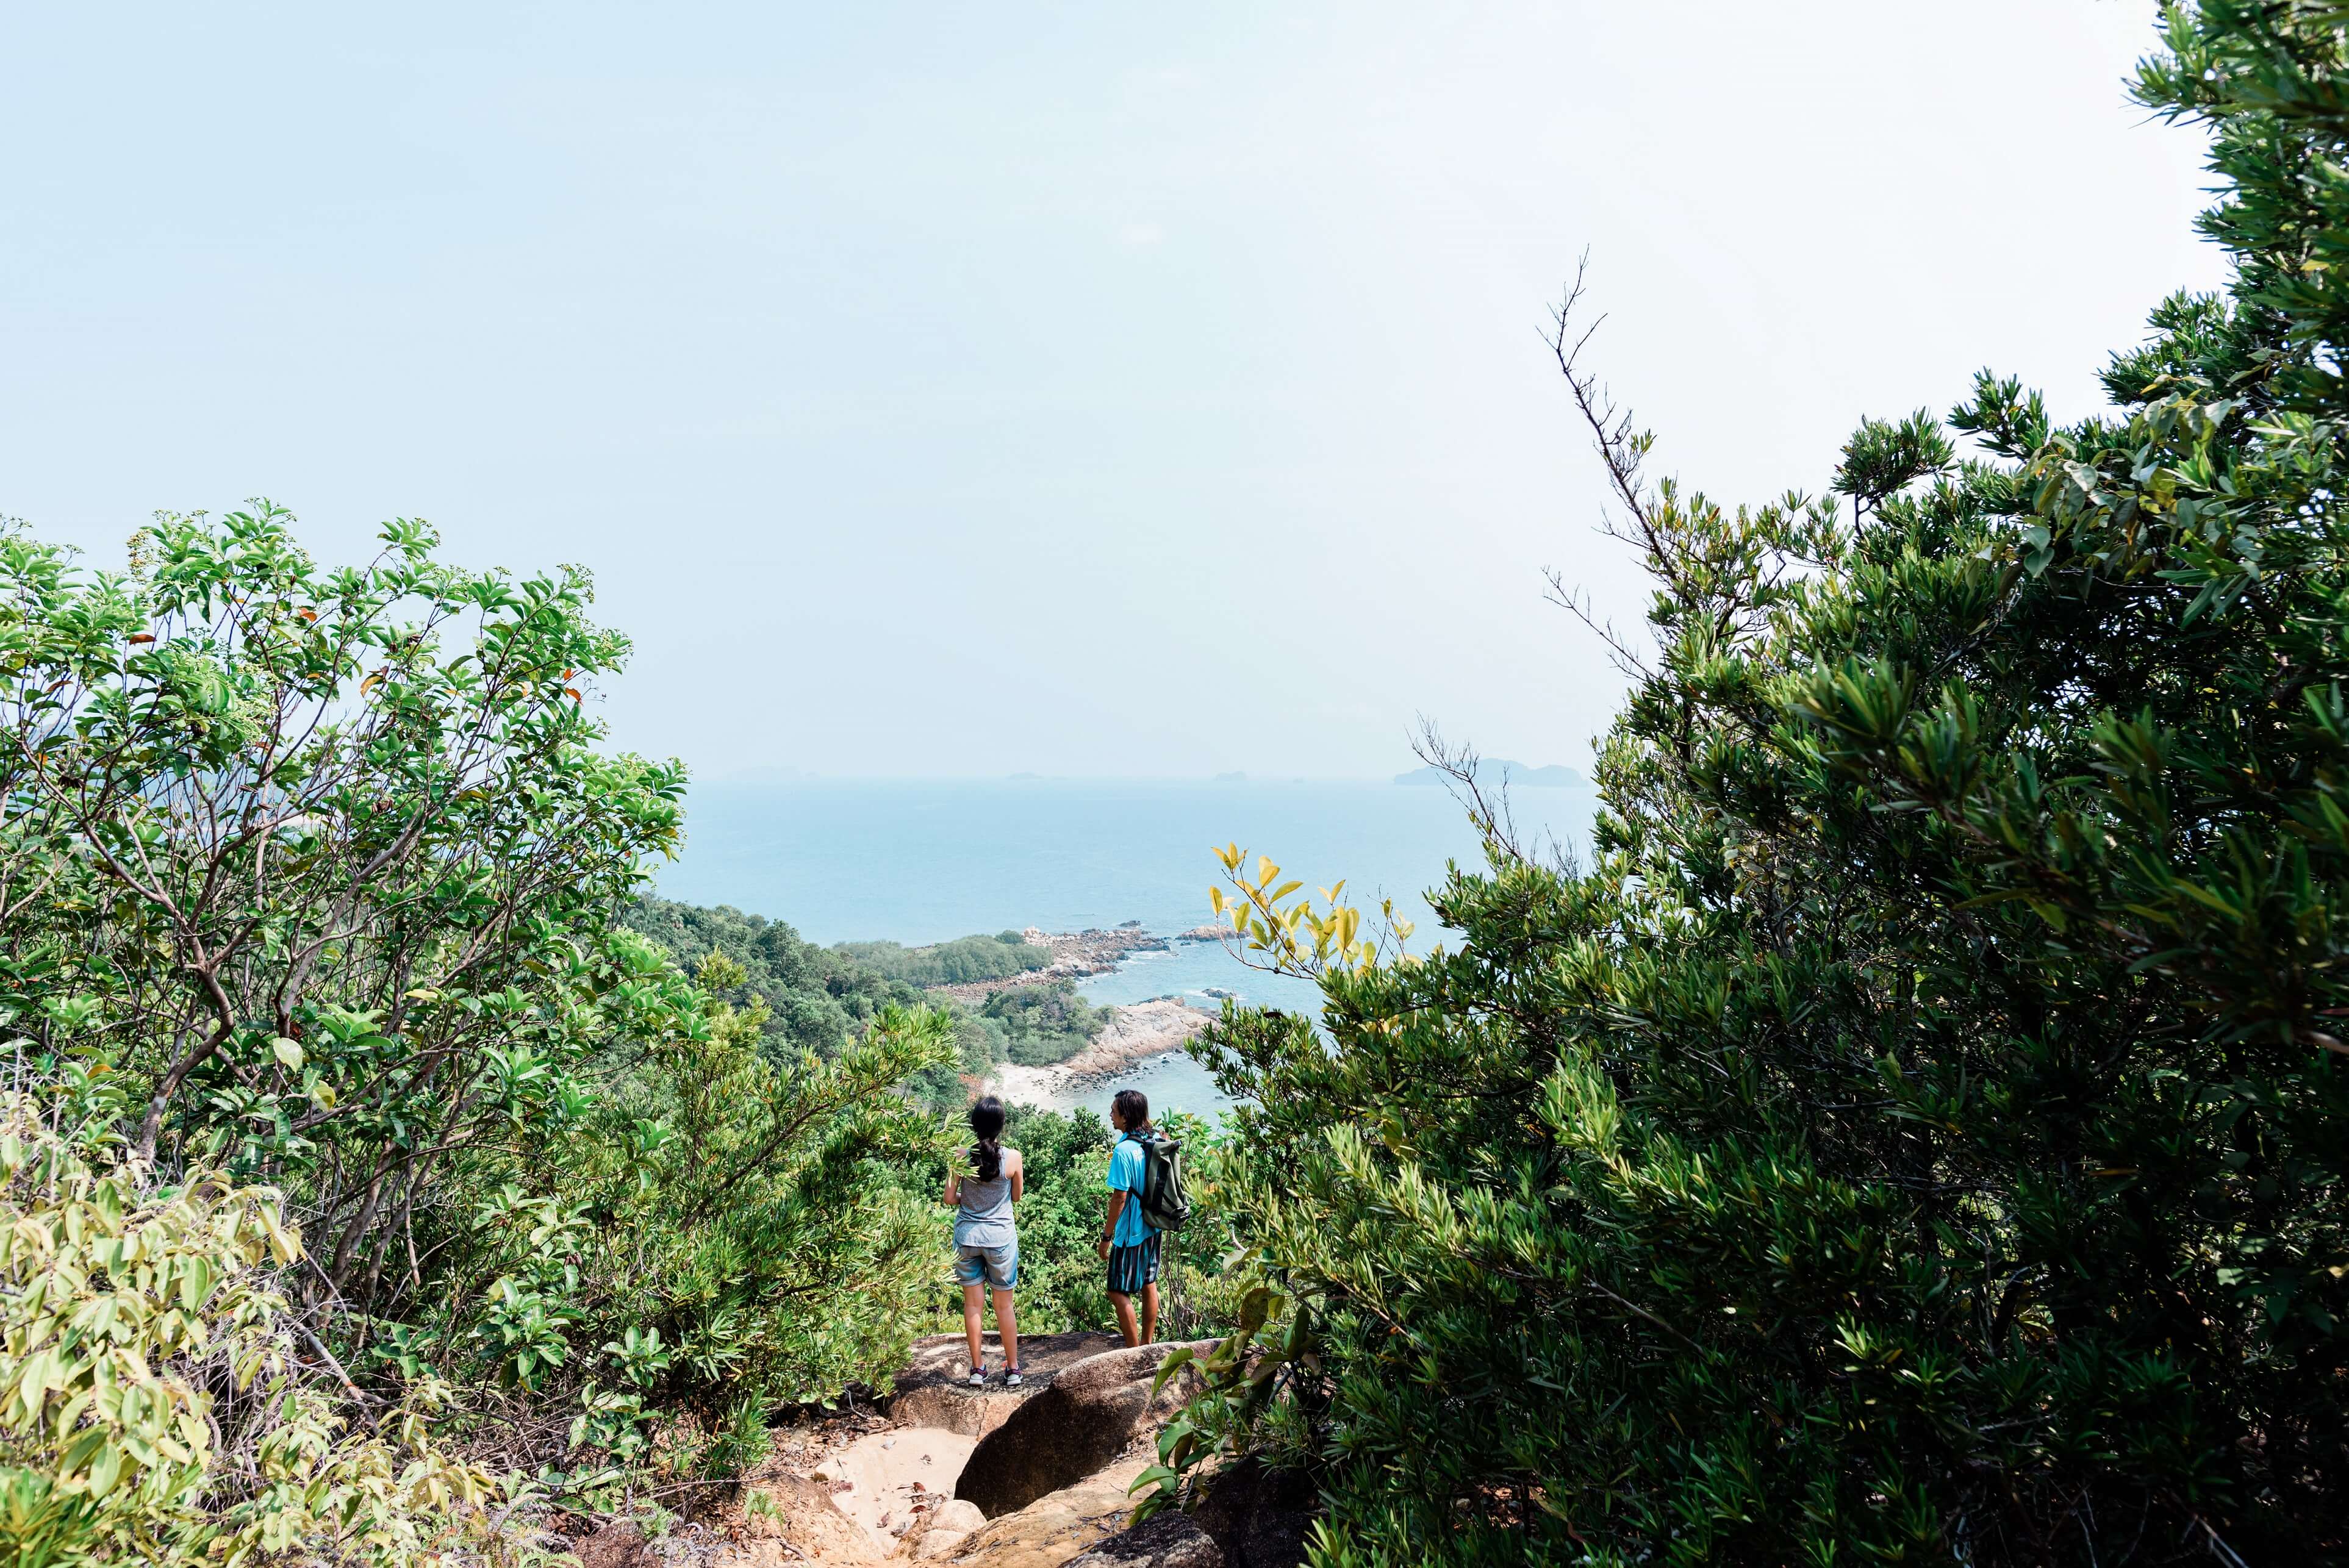 Guests can explore hiking trails around the island, which was once a transit camp for refugees fleeing Vietnam in the 1970s. Today, it is one of 13 islands that make up the protected Johor Marine Park. Photo by Kenny Ng 